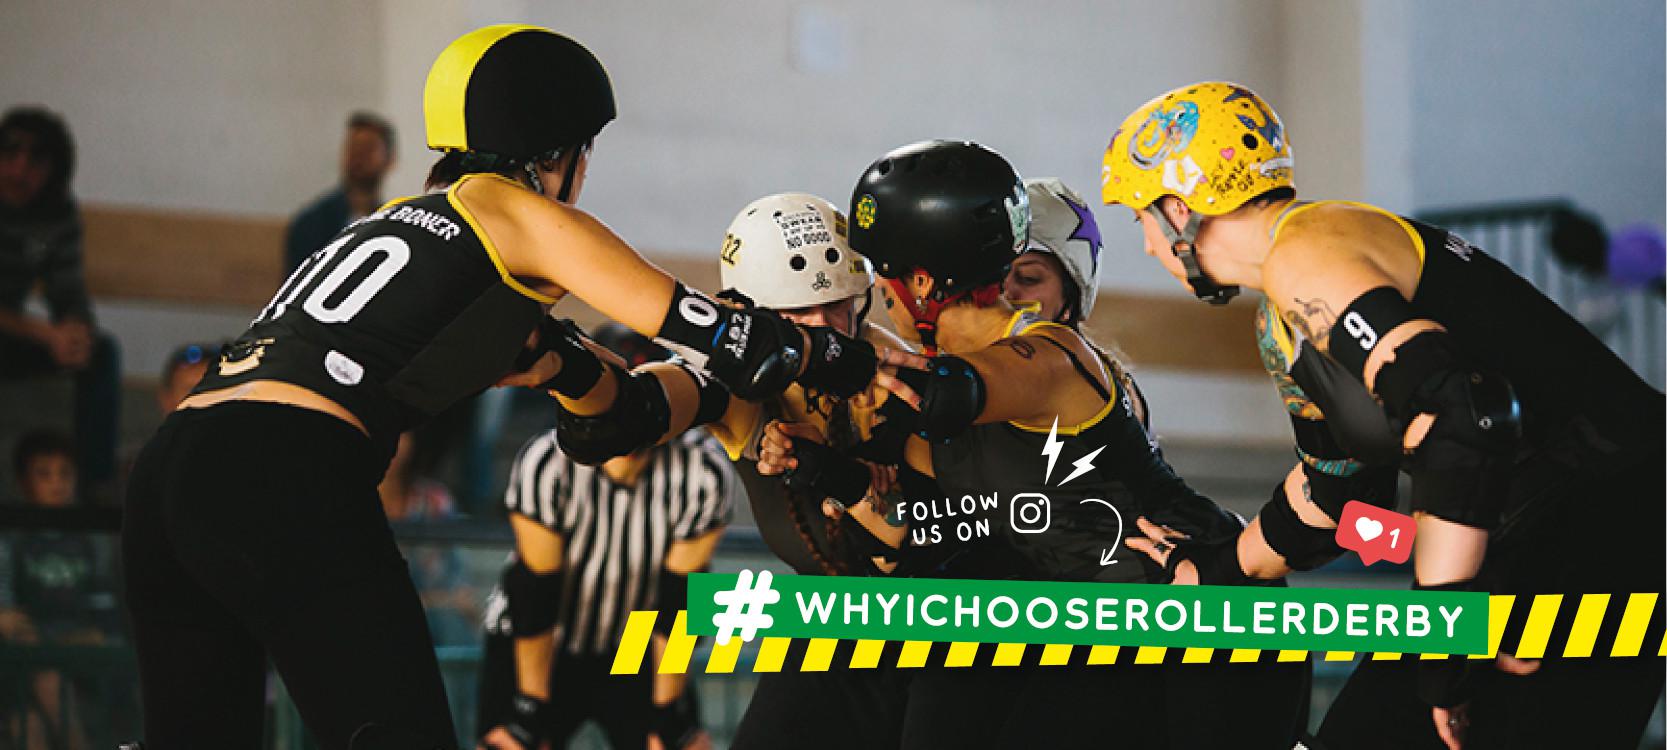 Flyer for #whyIchooserollerderby project, image of Banshees on track, overlaid with hashtag and instagram icons.